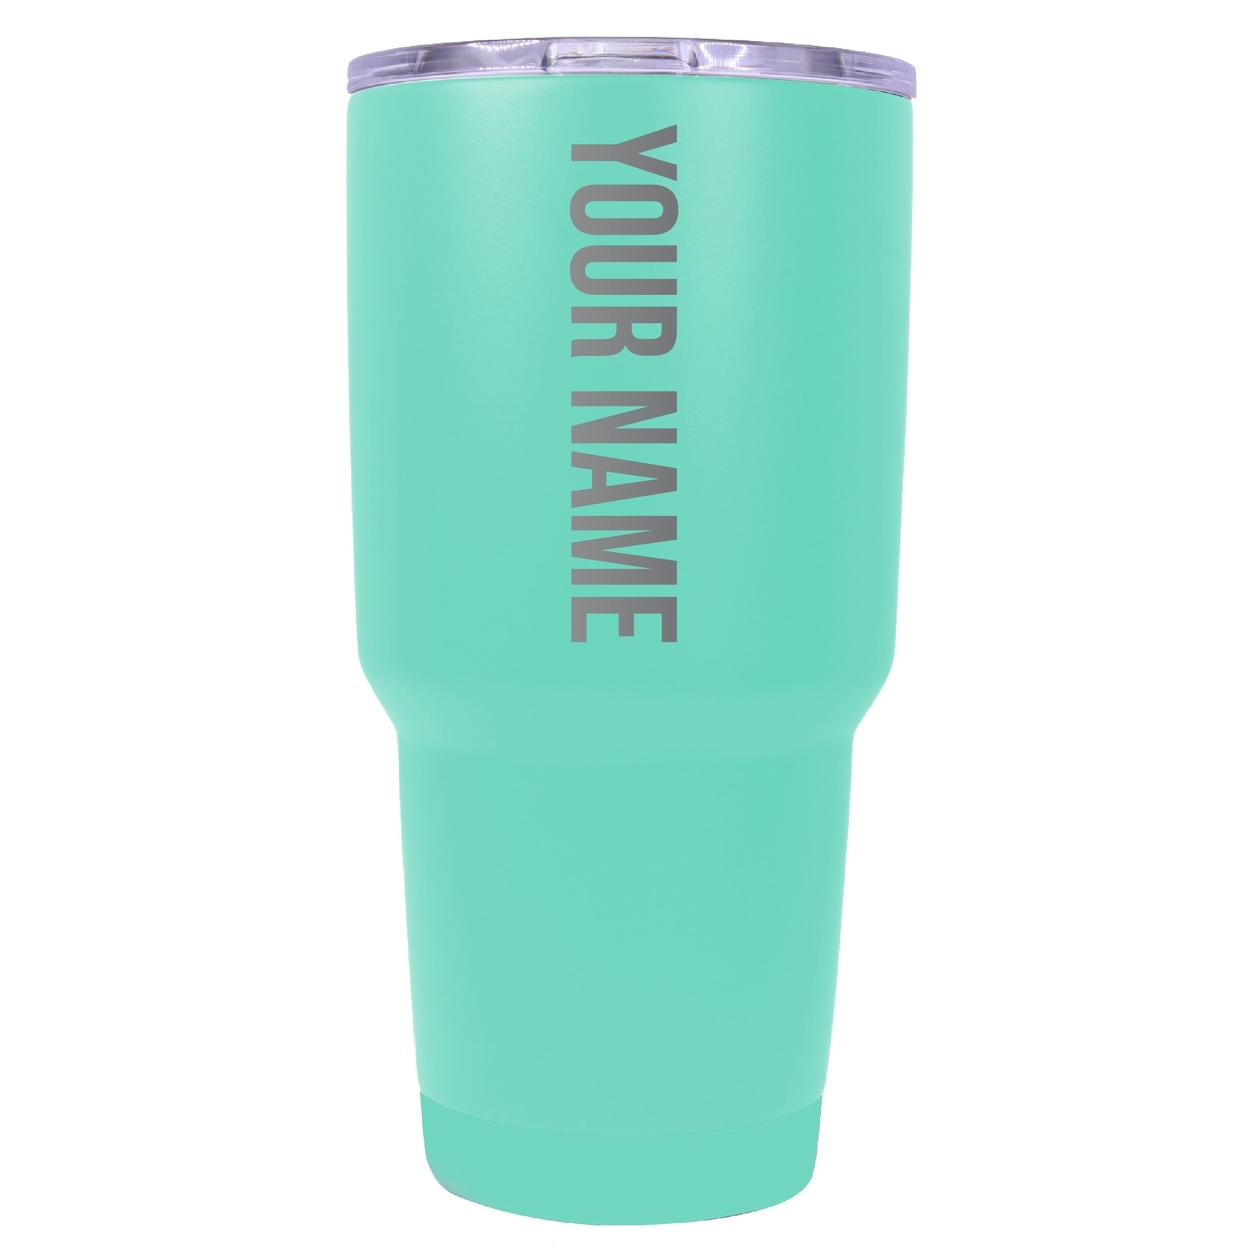 Customizable Laser Etched 24 Oz Insulated Stainless Steel Tumbler Personalized With Custom Name Or Message - Seafoam, 2 Pack